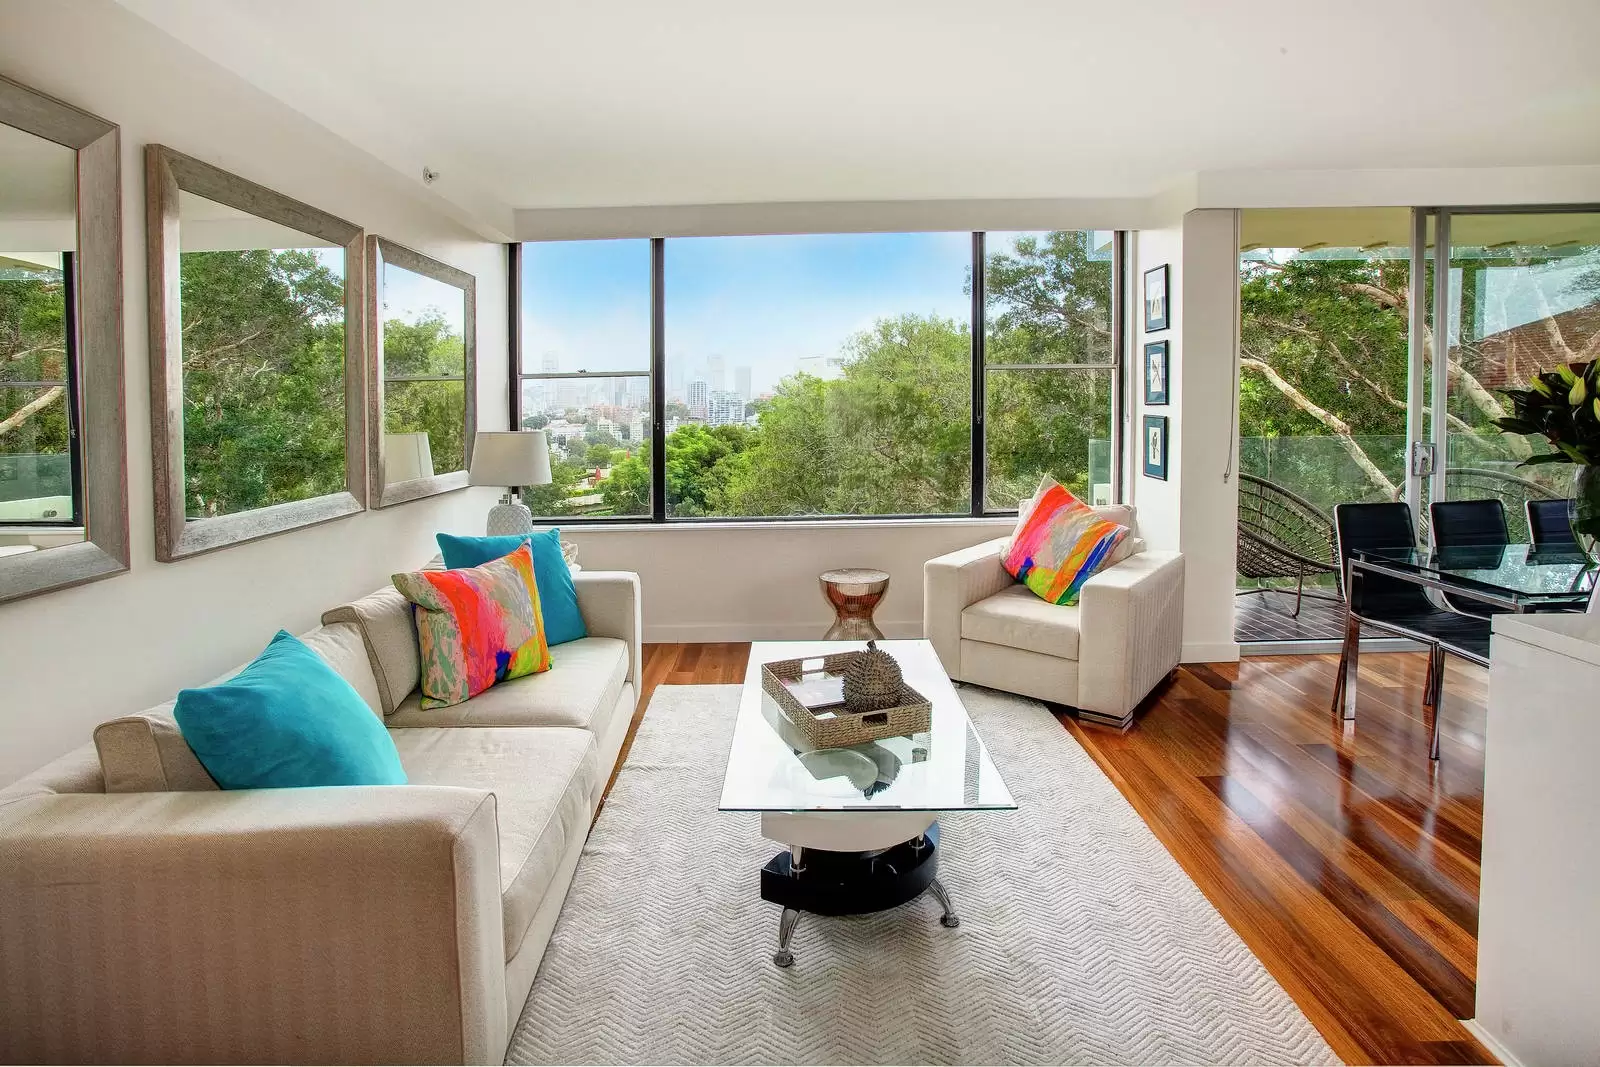 Photo #3: 3 Darling Point Road, Darling Point - For Sale by Sydney Sotheby's International Realty